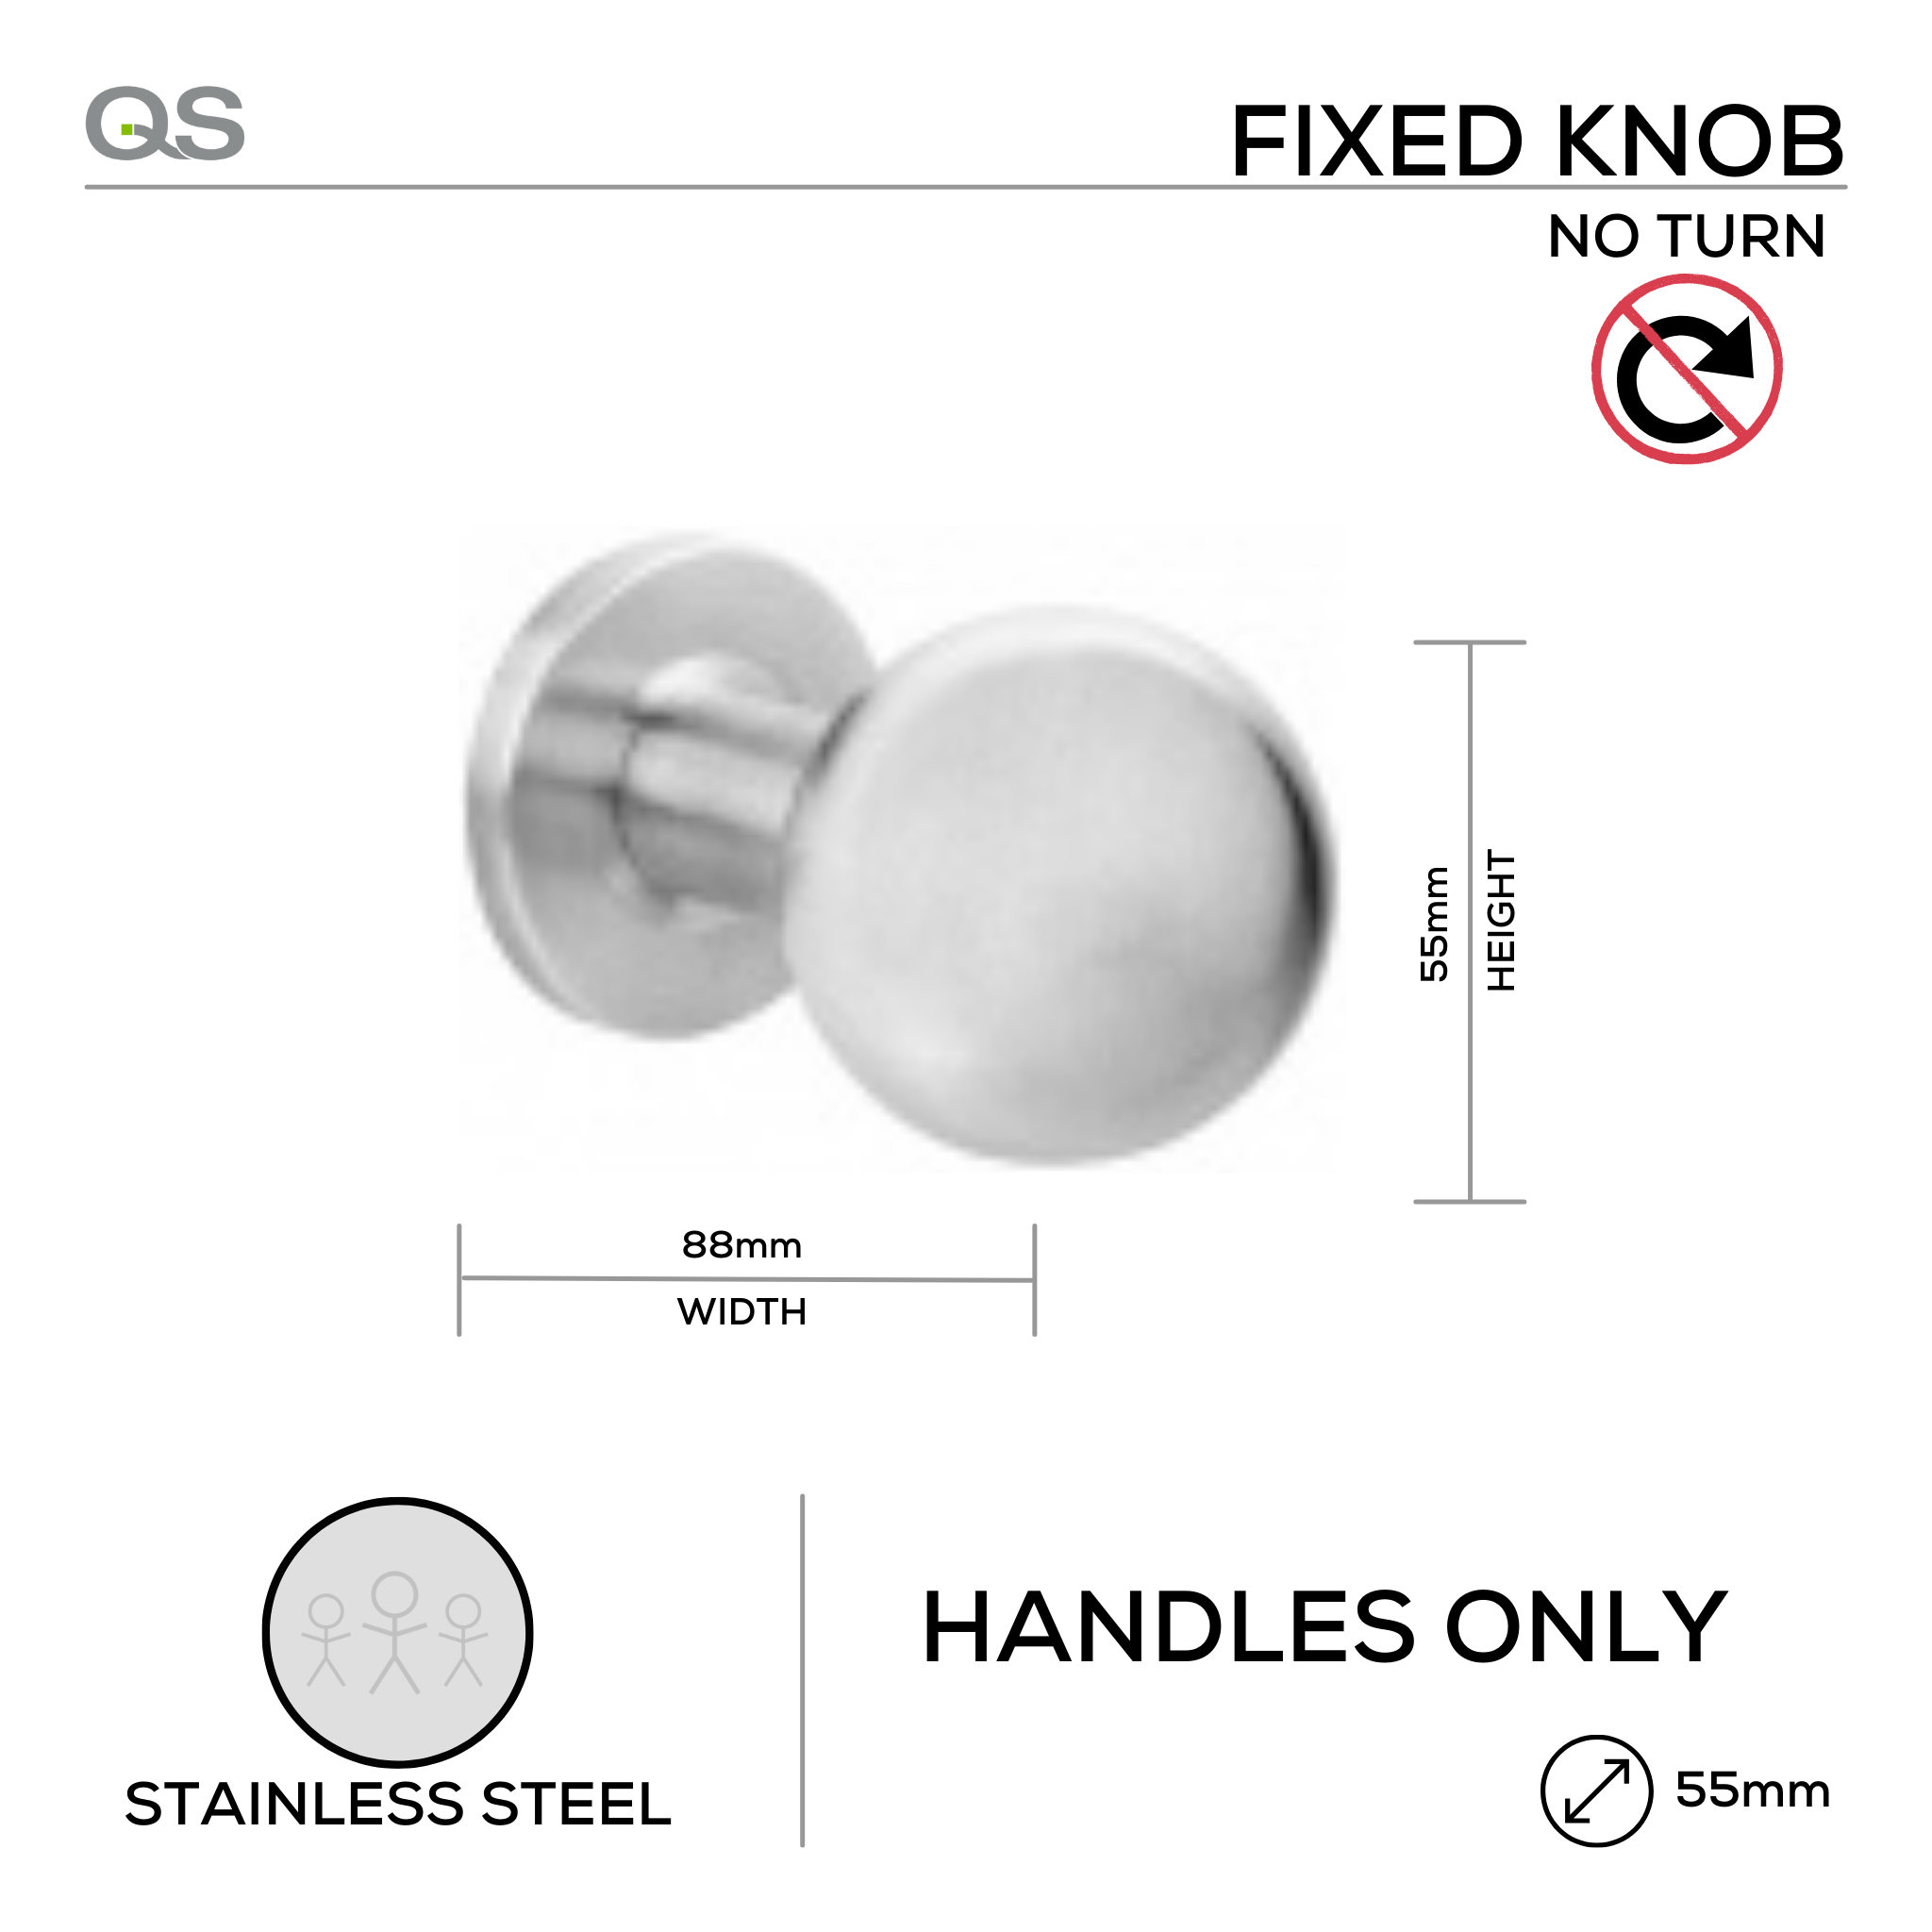 QS3820, Knob Handle, Fixed Round Ball, Stainless Steel, QS